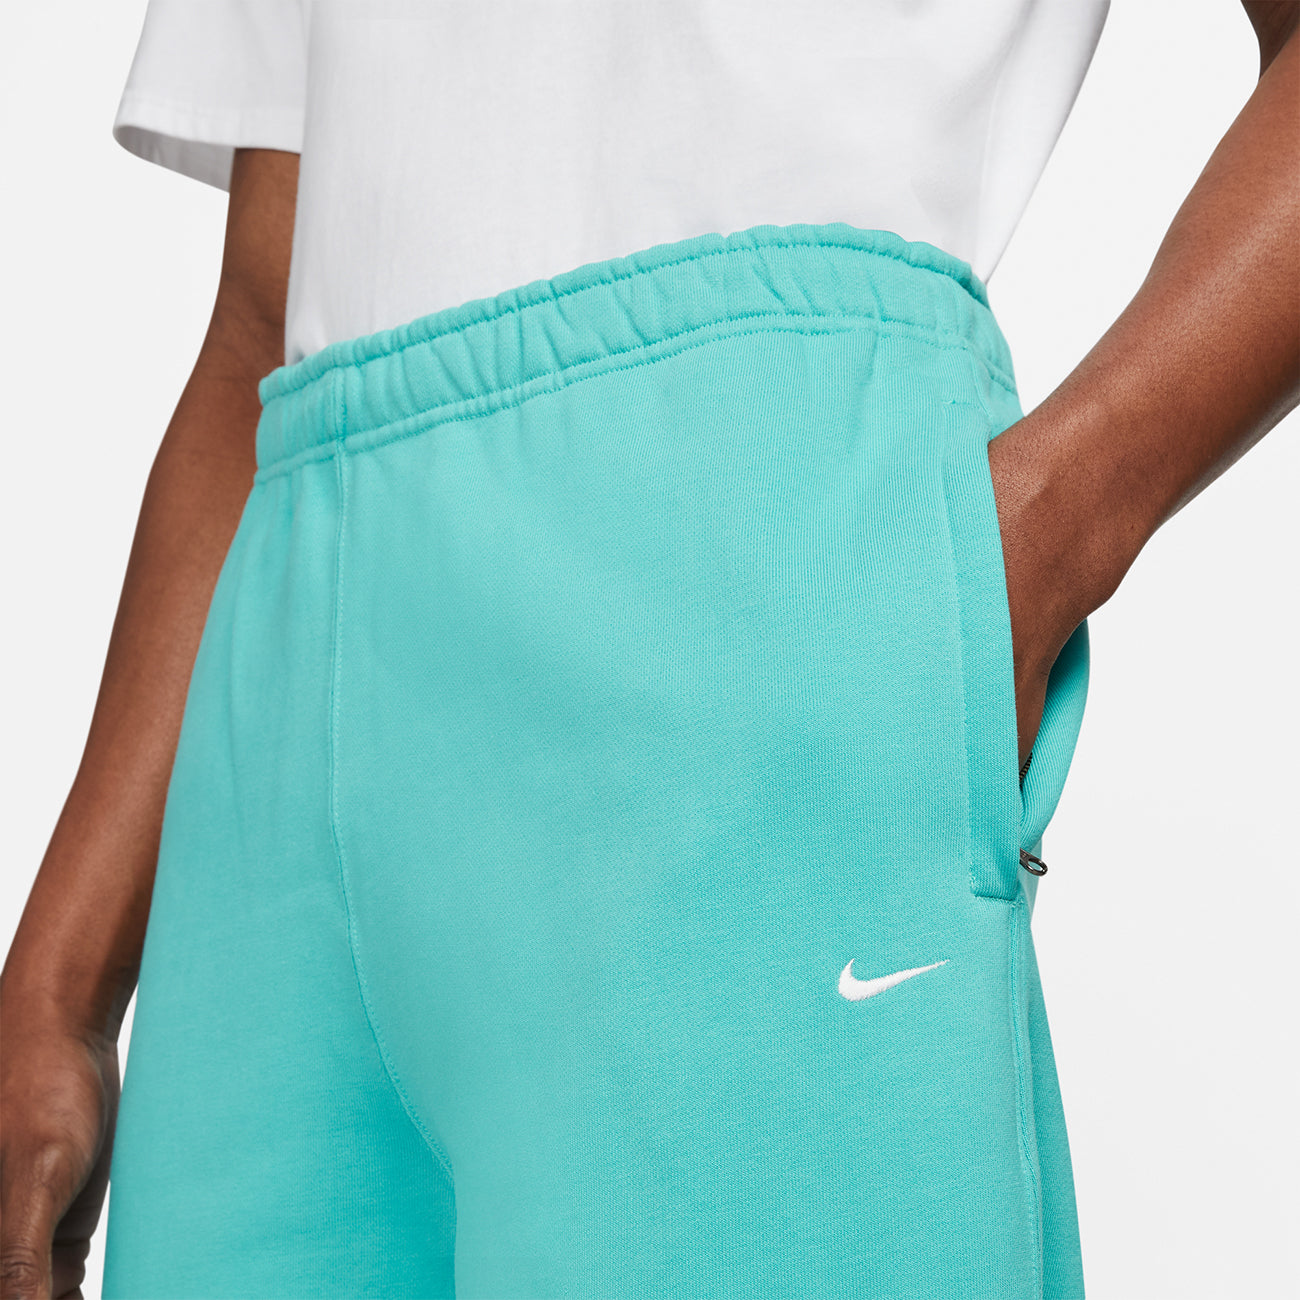 Soloswoosh Pant - Washed Teal/White